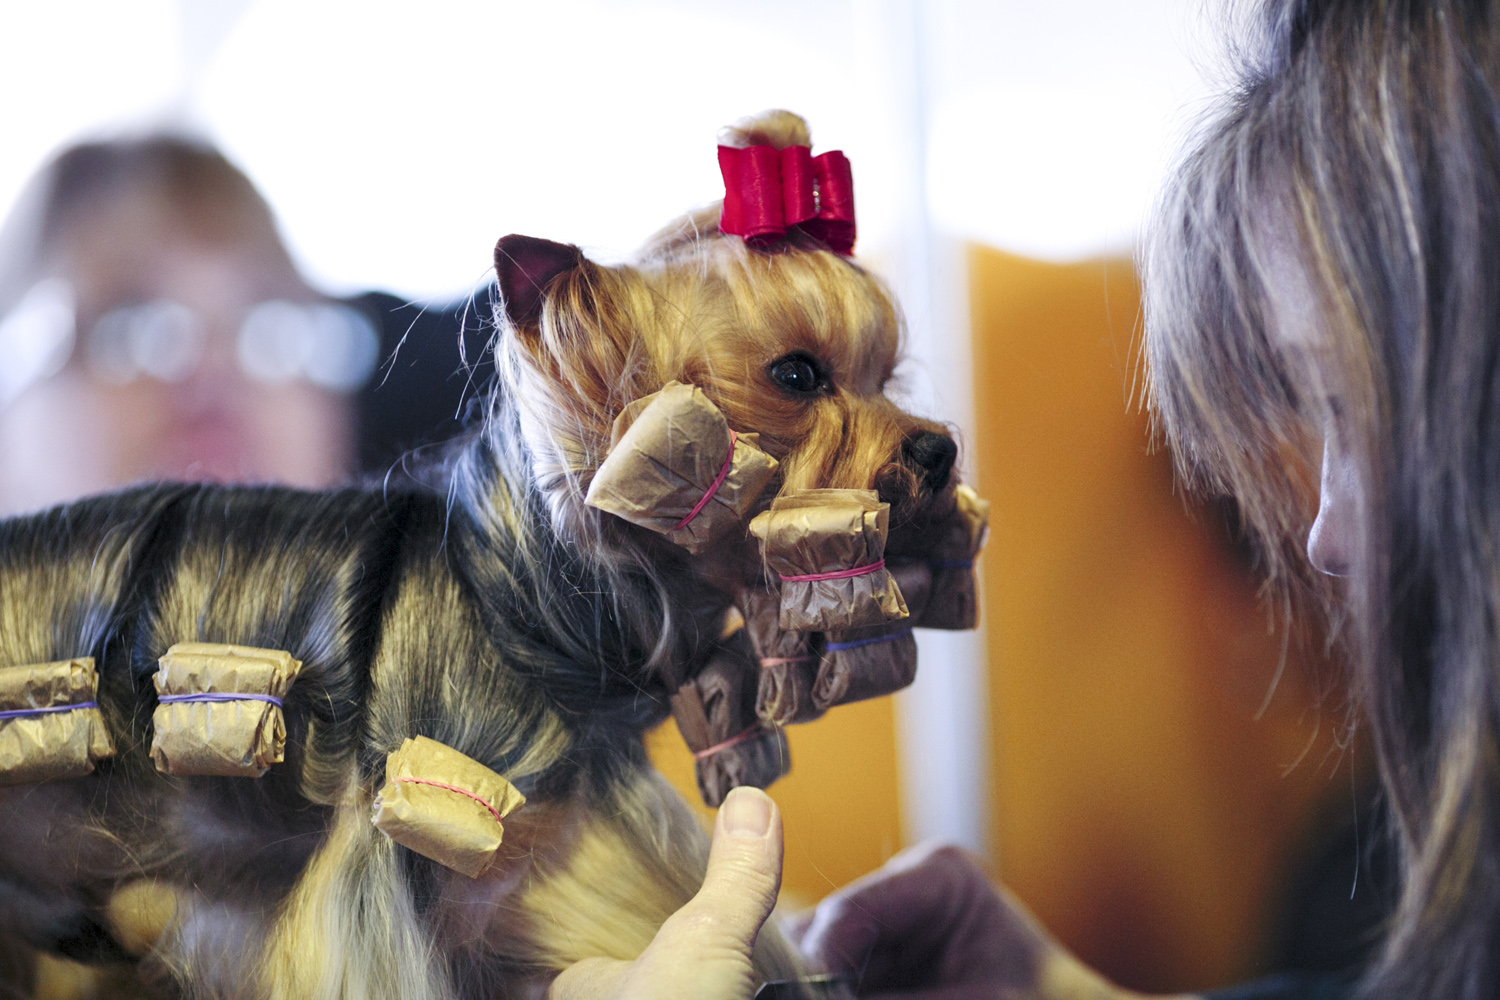 Feb. 10, 2014. Dawn Kelly grooms and puts curler's on her Yorkshire terrier at the Westminster Kennel Club 138th Annual Dog Show in New York.